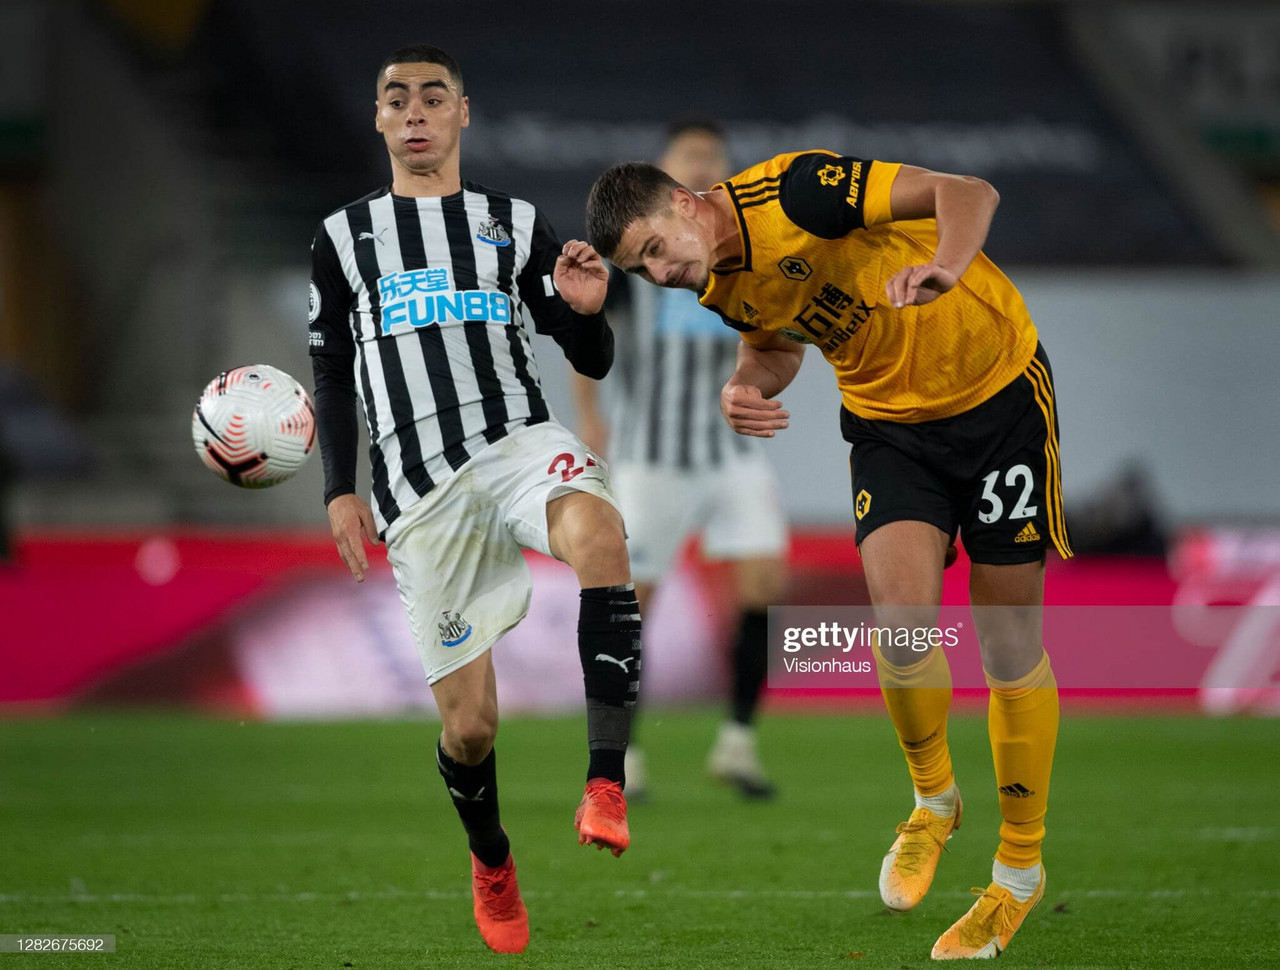 Newcastle United vs Wolverhampton Wanderers preview: How to watch, kick-off time, team news, predicted lineups and ones to watch